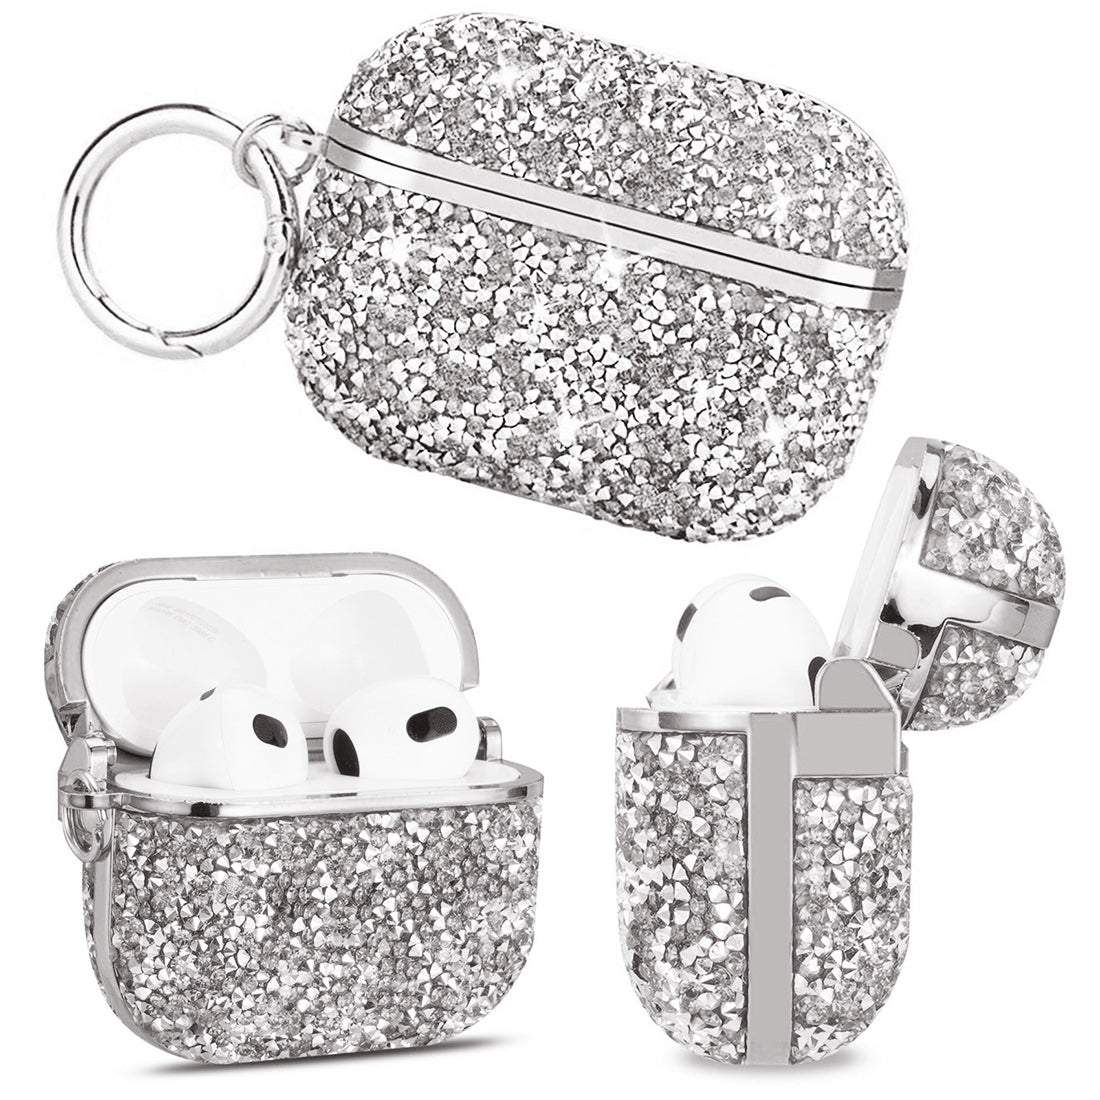 Miitoomo for Apple AirPods Case Glitter Diamond and Ring Keychain